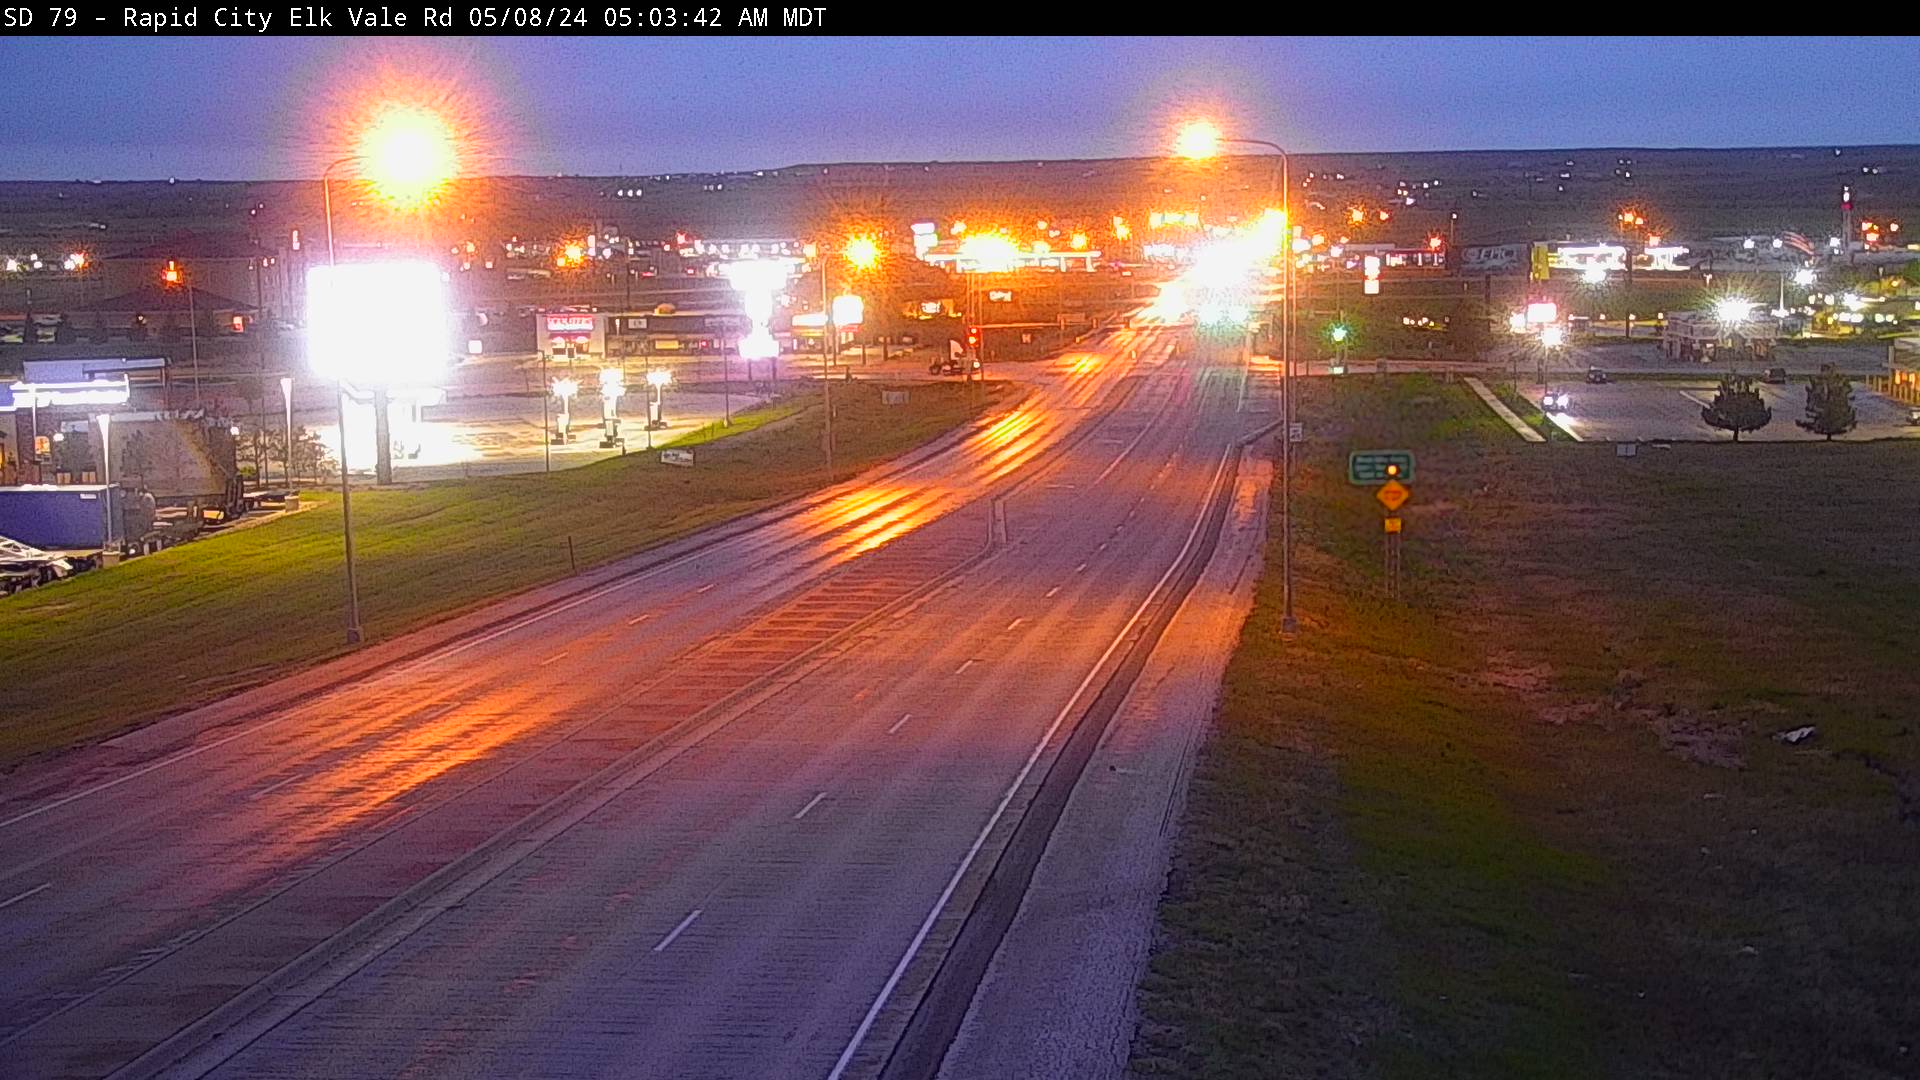 East of town along US-16B/Elk Vale Rd south of I-90 exit 61 - North Traffic Camera